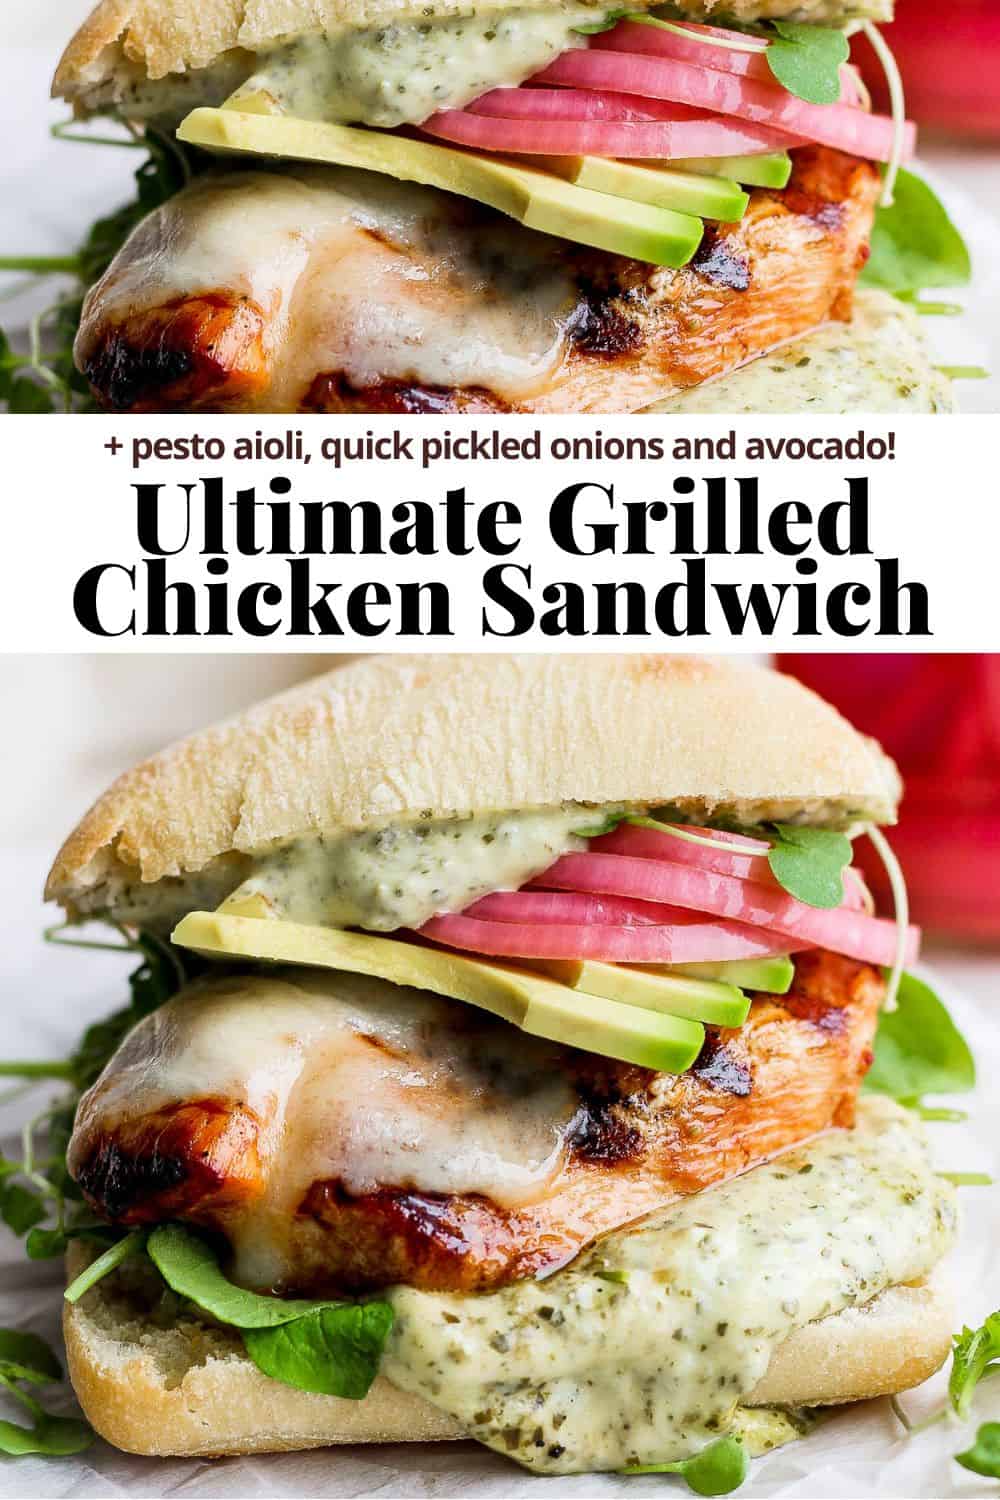 Pinterest image showing the grilled chicken sandwich with the recipe in the middle.